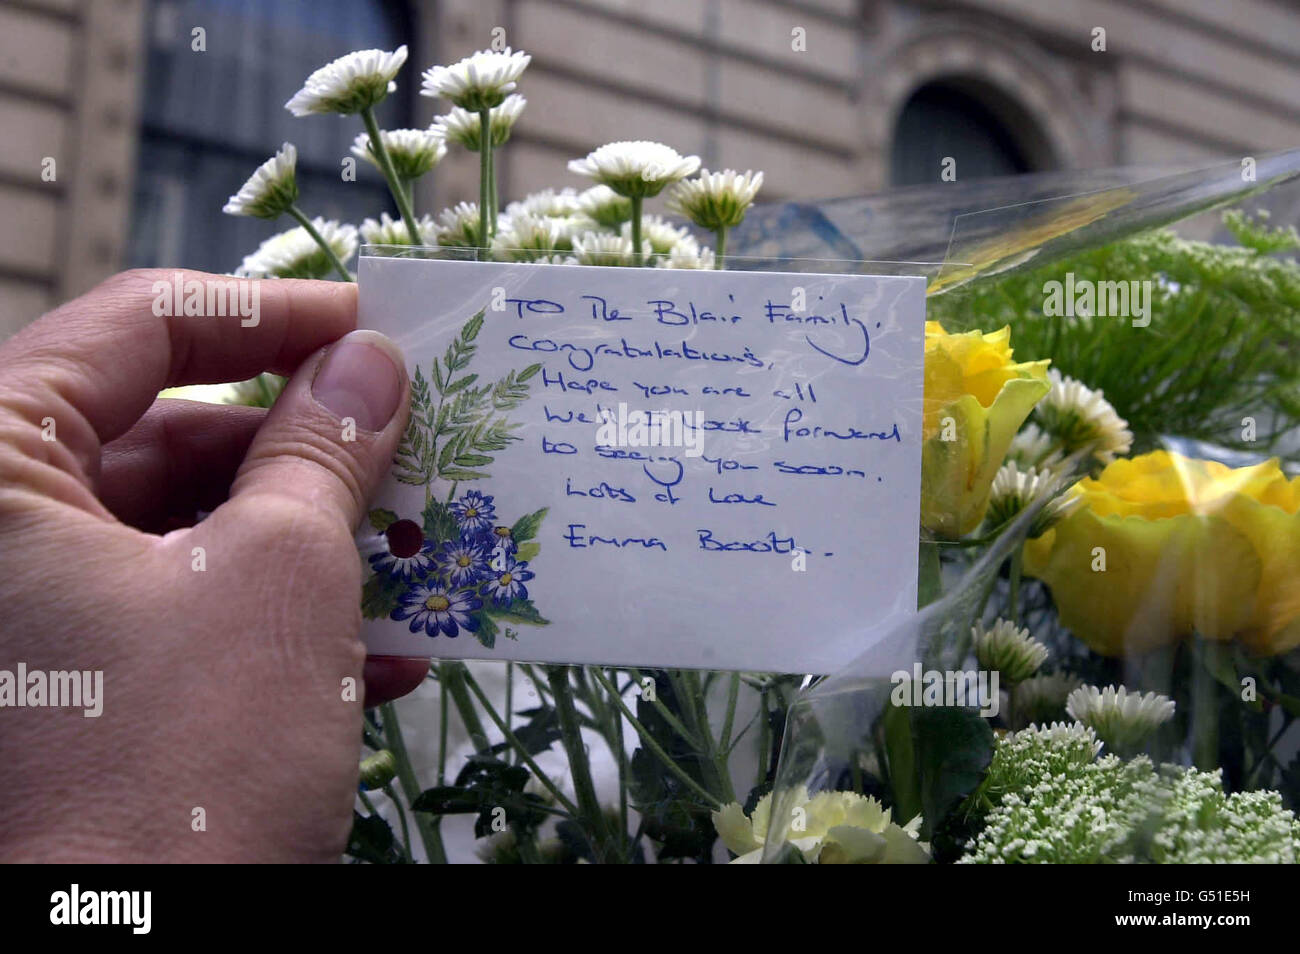 A greetings card with flowers delivered to number 10 Downing Street for the Prime Minister Tony Blair and his wife Cherie who is resting after giving birth to a baby boy in the early hours of this morning. Stock Photo